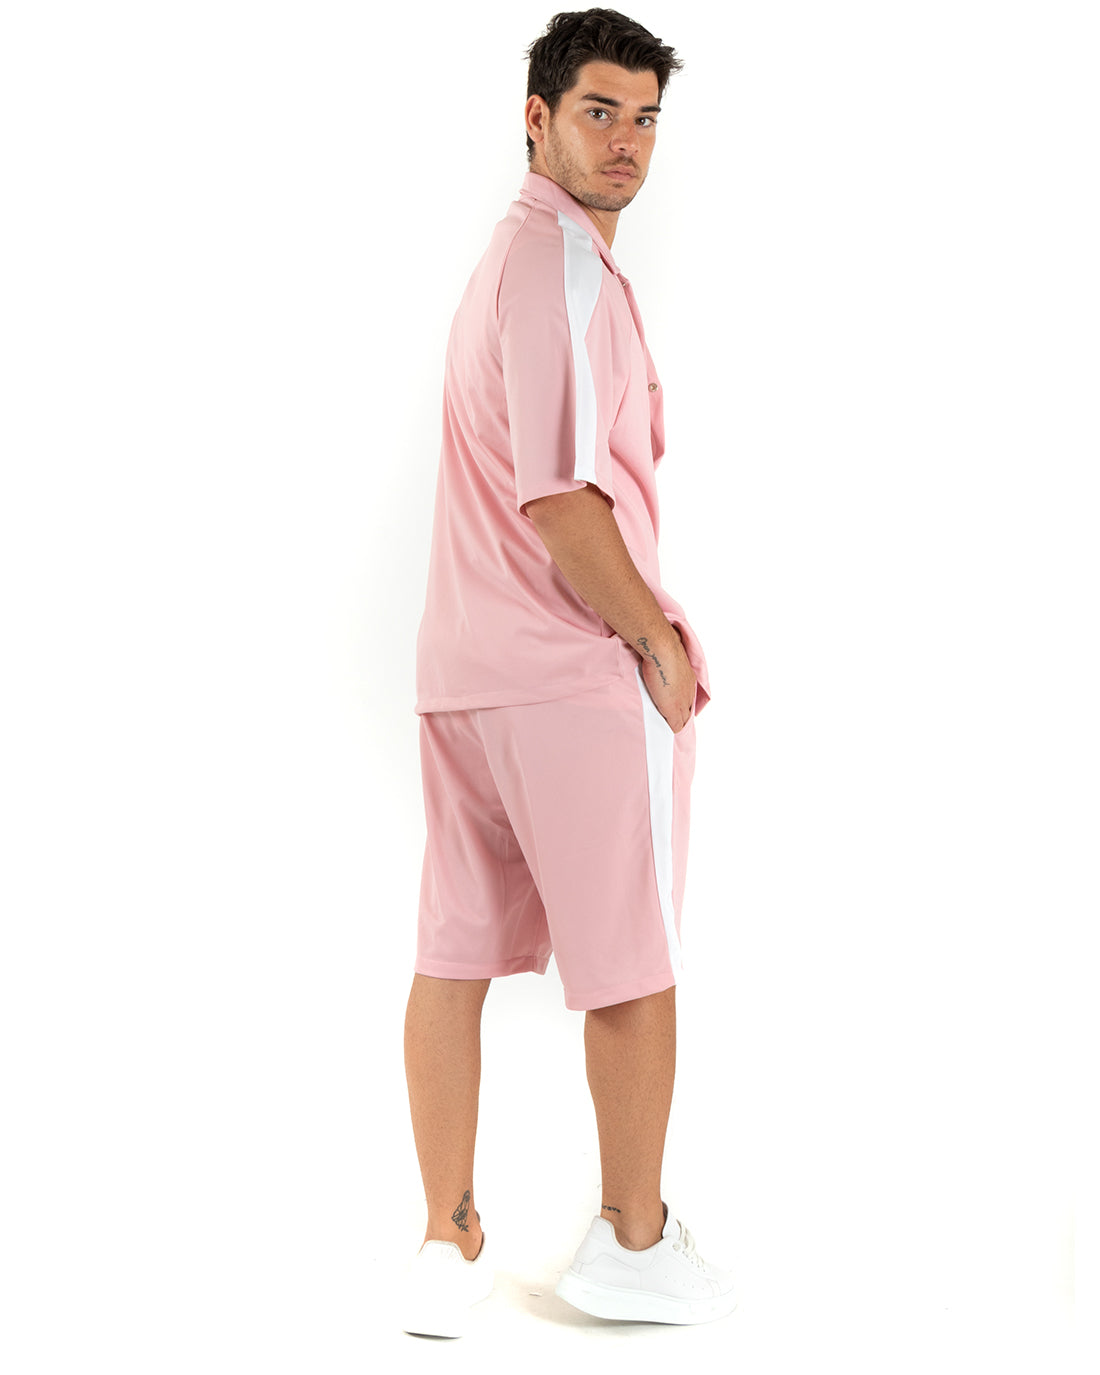 Complete Coordinated Set for Men Viscose Shirt with Bermuda Collar Outfit Pink GIOSAL-OU2363A